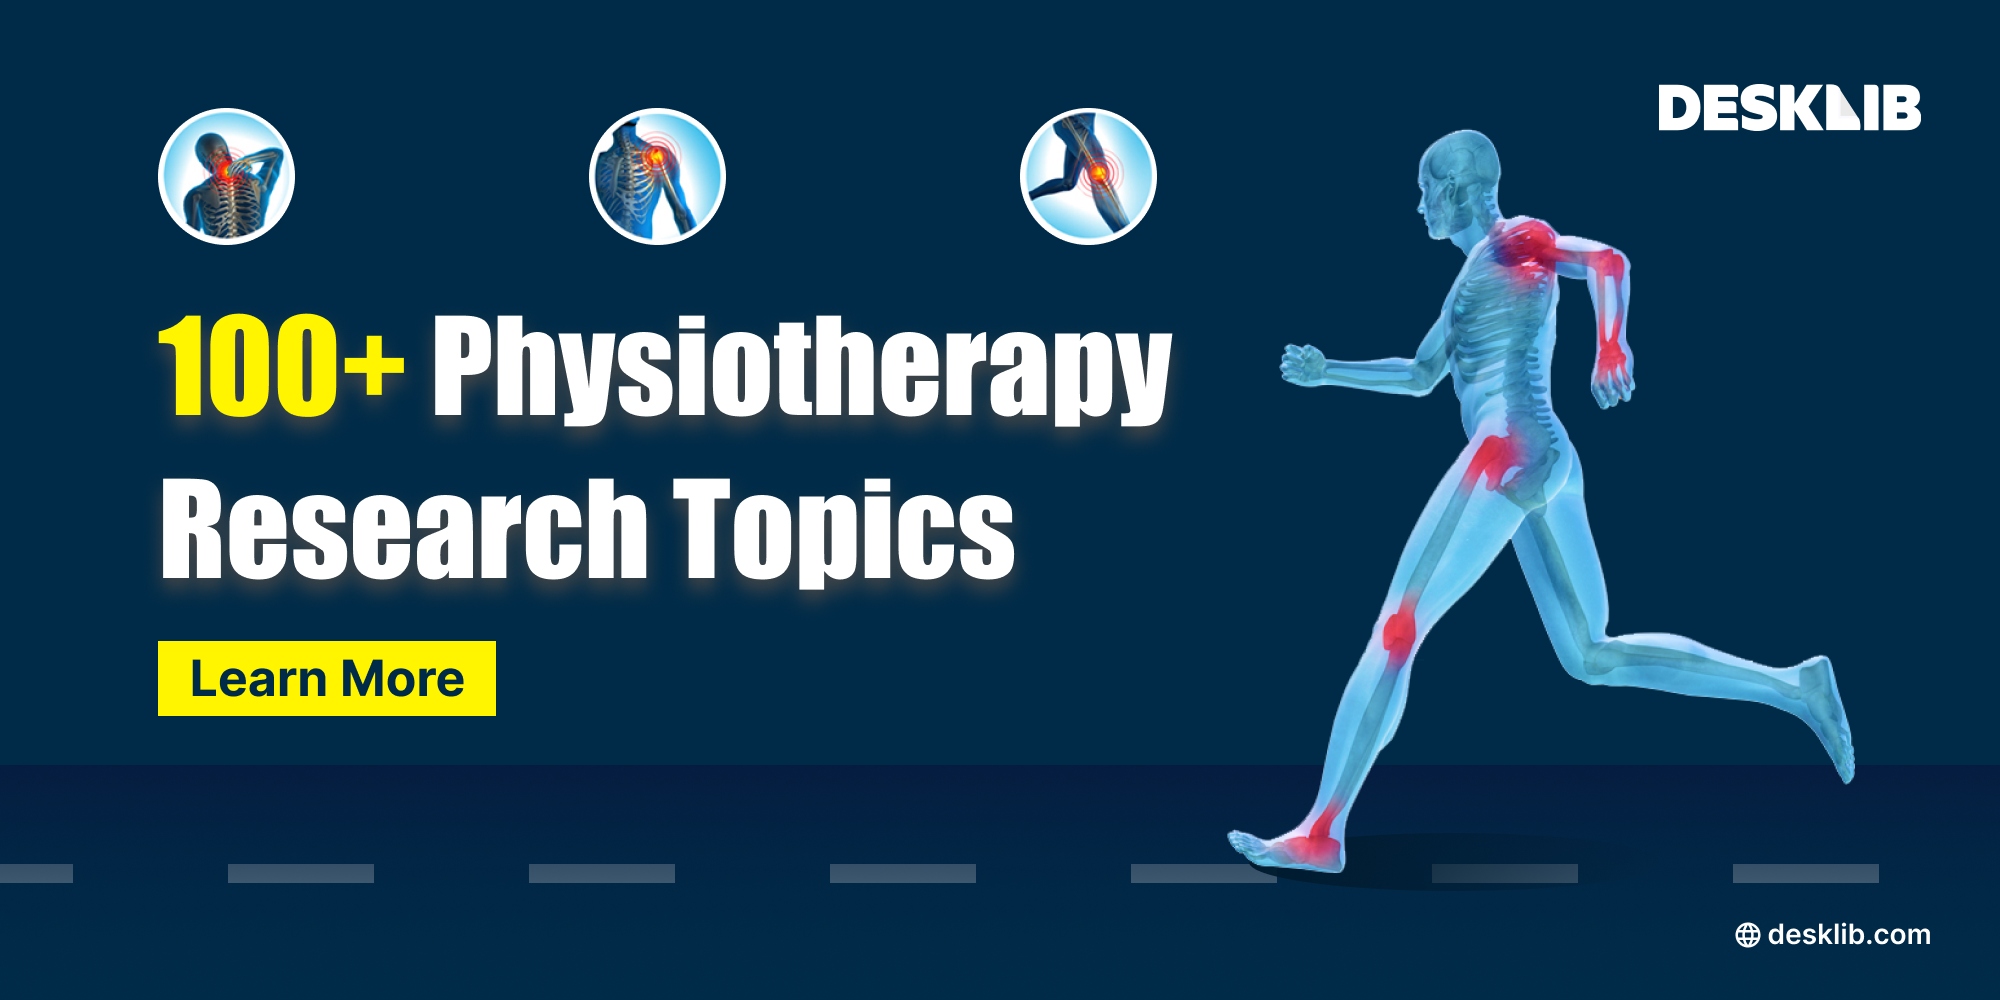 sports physiotherapy dissertation topics